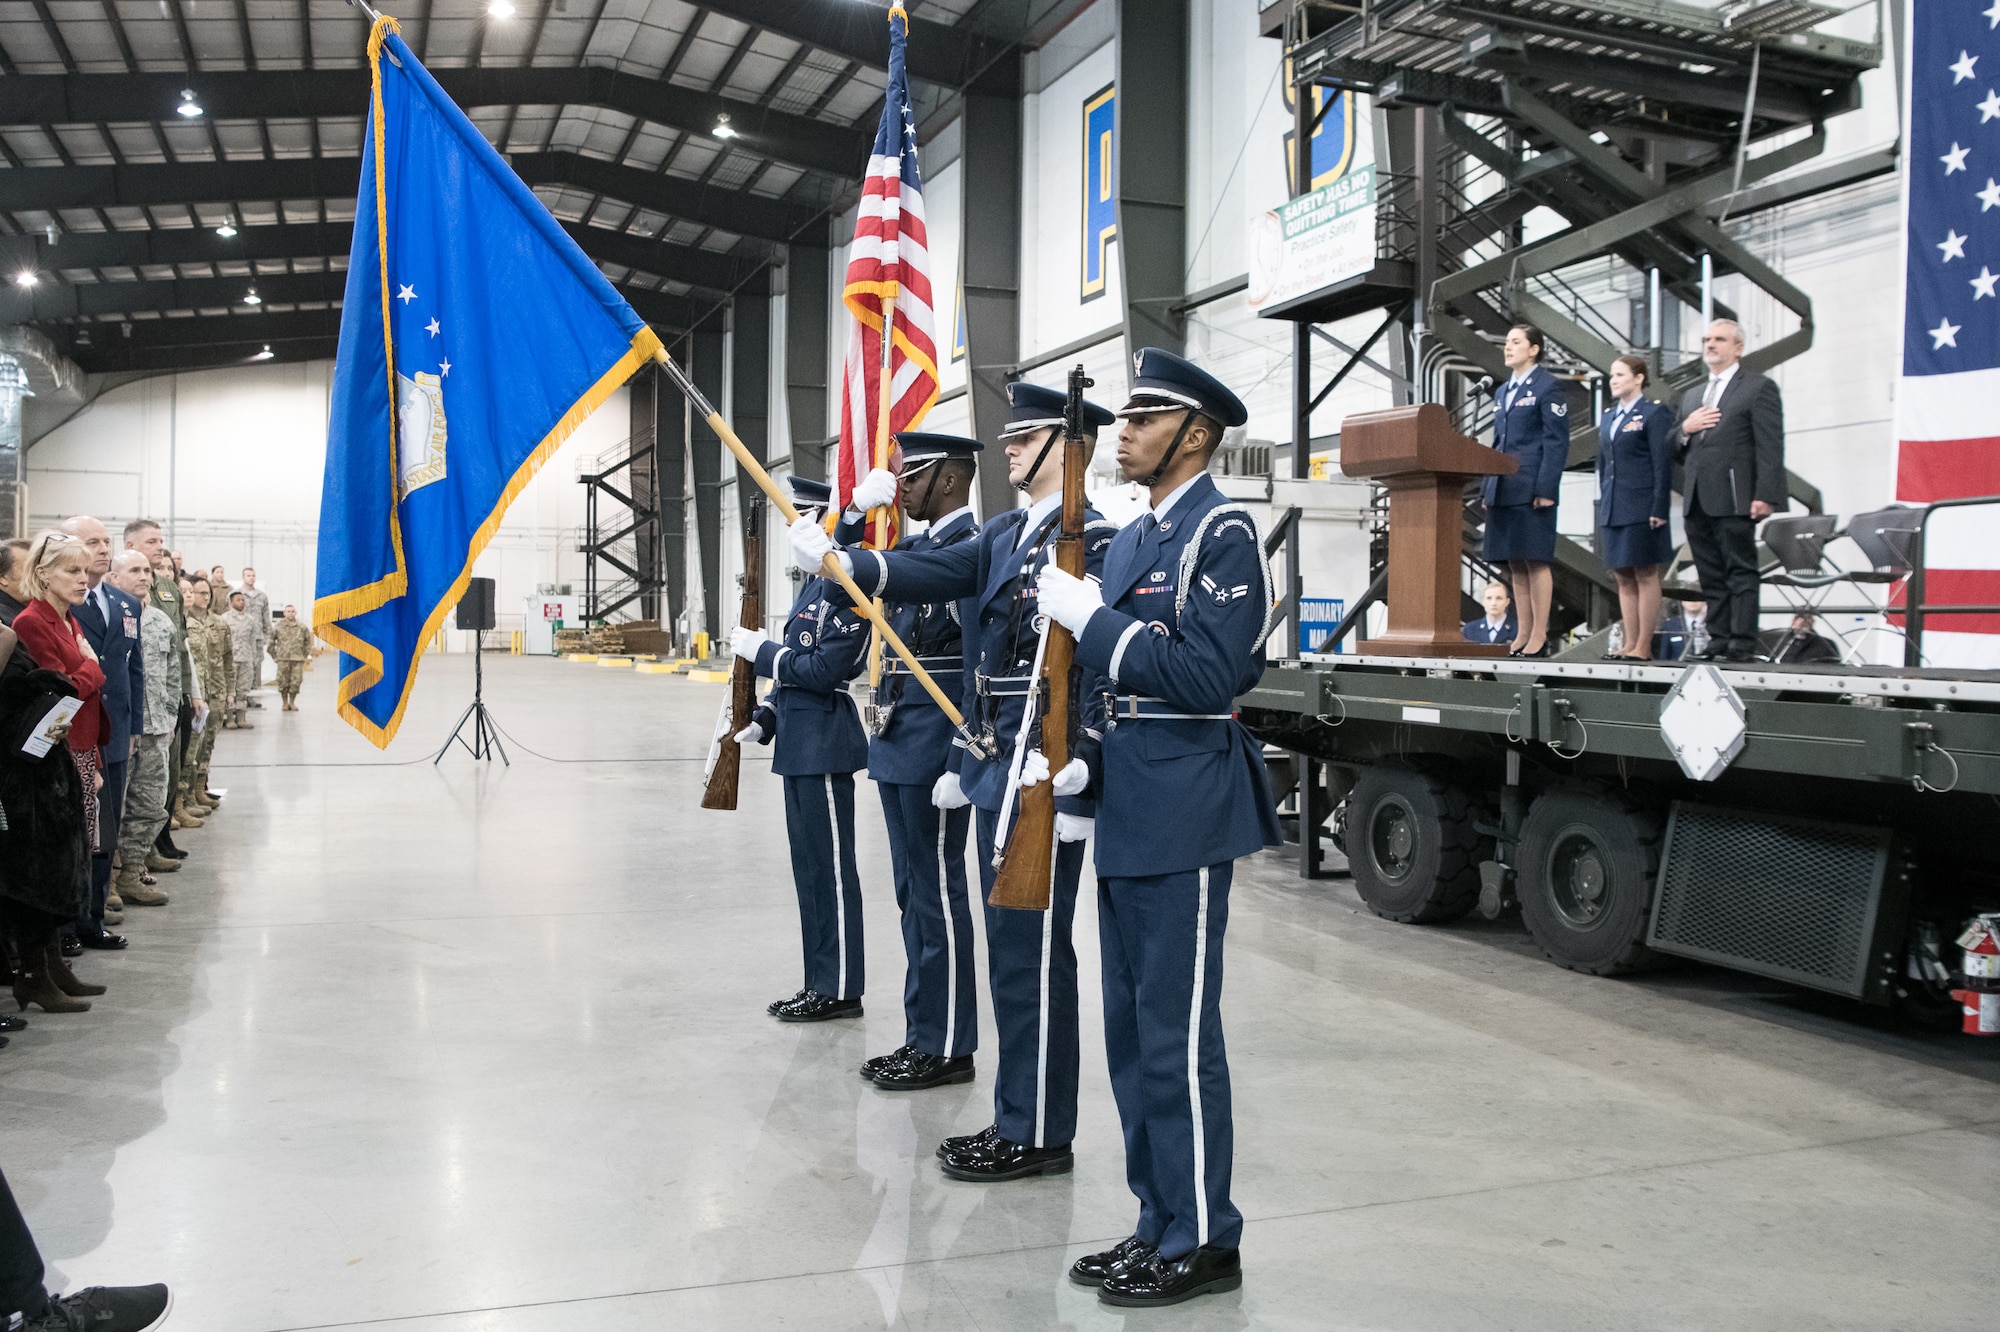 The Dover Air Force Base Honor Guard presents the colors during the 436th AW Change of Command ceremony Jan 7, 2020, at Dover Air Force Base, Del. More than 100 Airmen from Dover participated in the ceremony. (U.S. Air Force photo by Mauricio Campino)